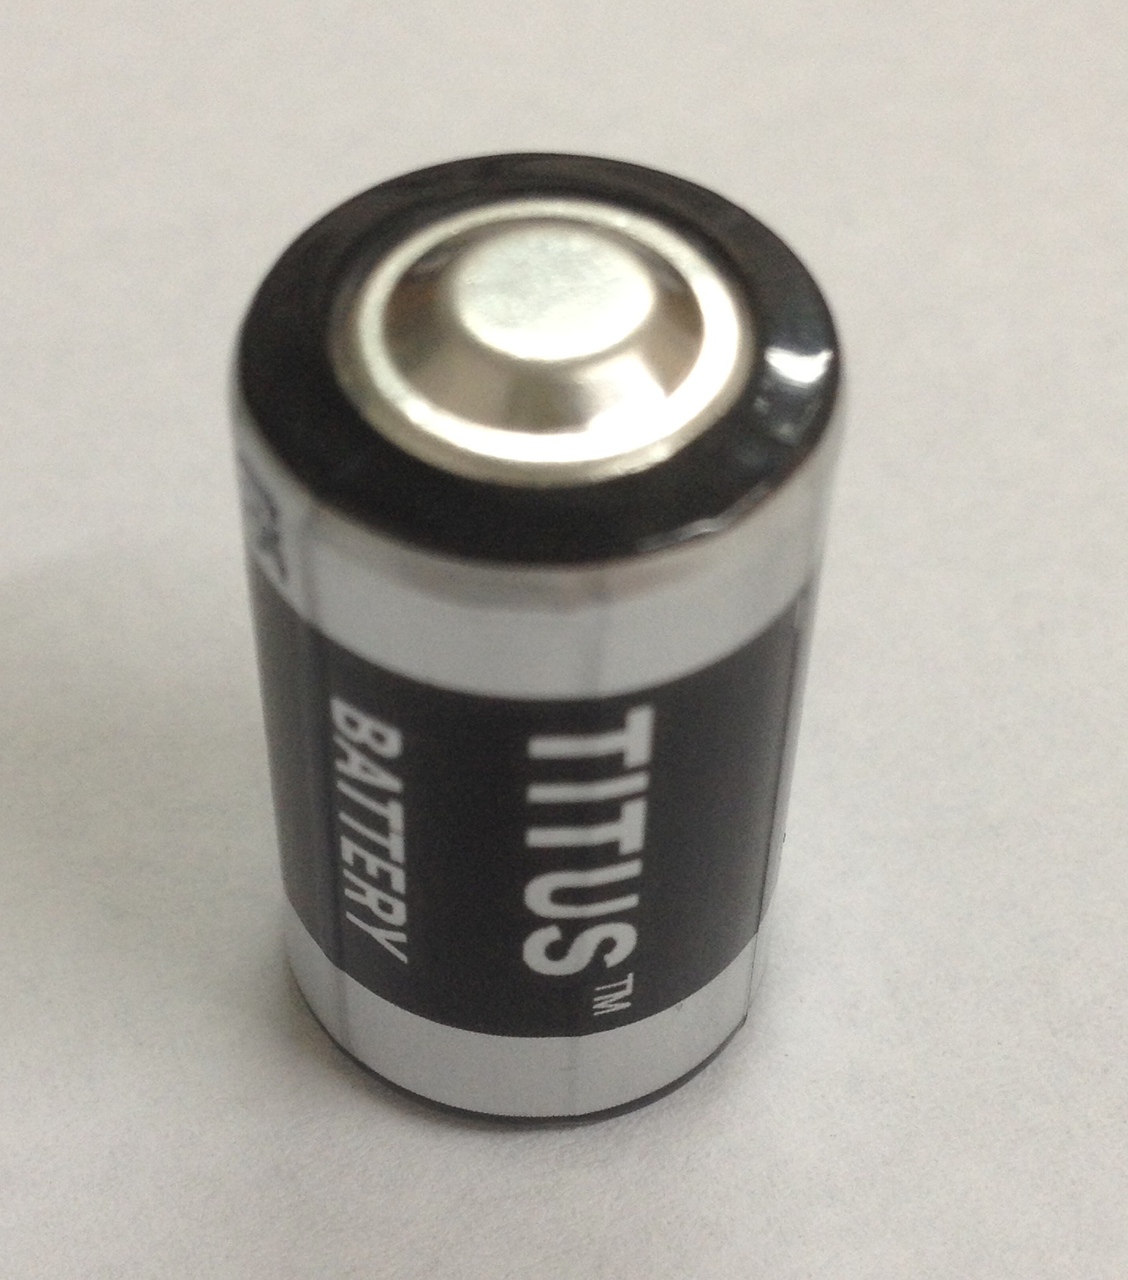 Titus 1/2 AA Size 3.6V ER14250MT High Energy Lithium Battery With Solder Tabs - 1 Pack + Free Shipping!